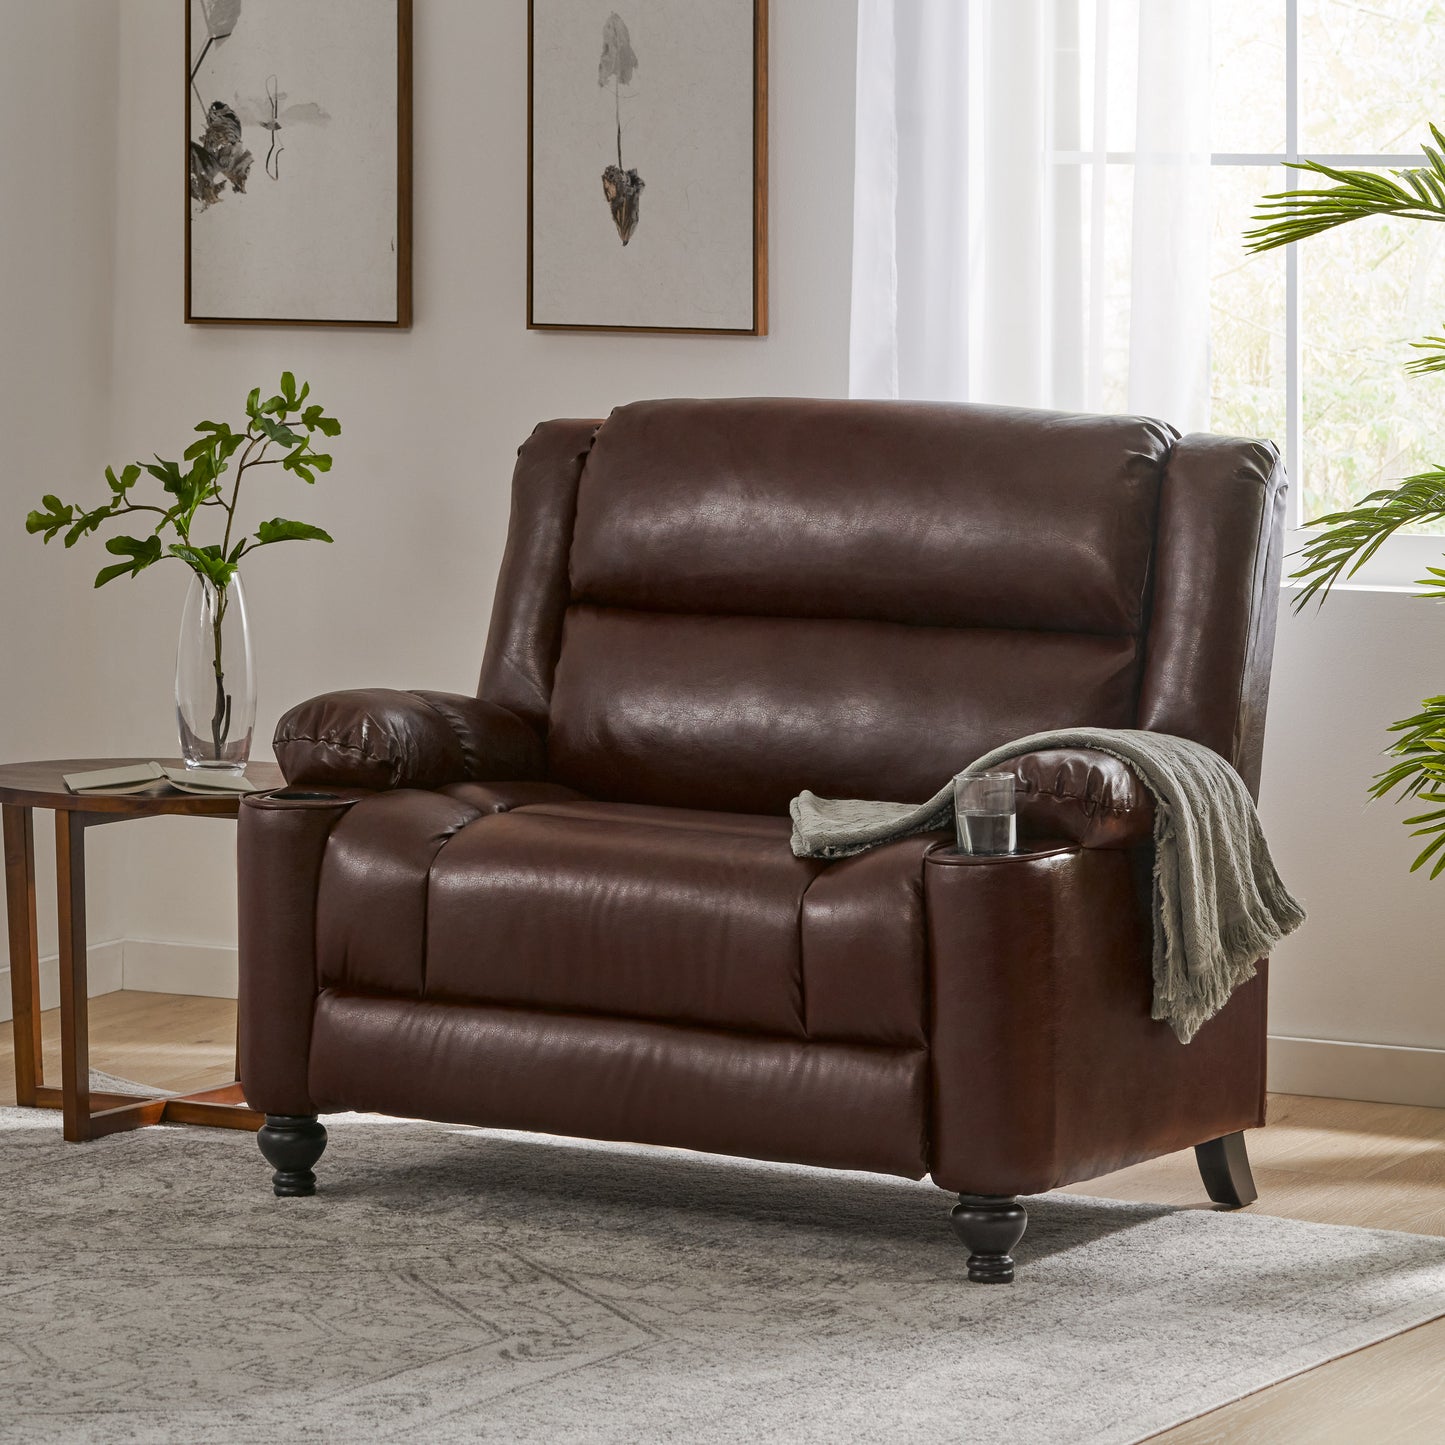 Upham Contemporary Faux Leather Oversized Pushback Recliner